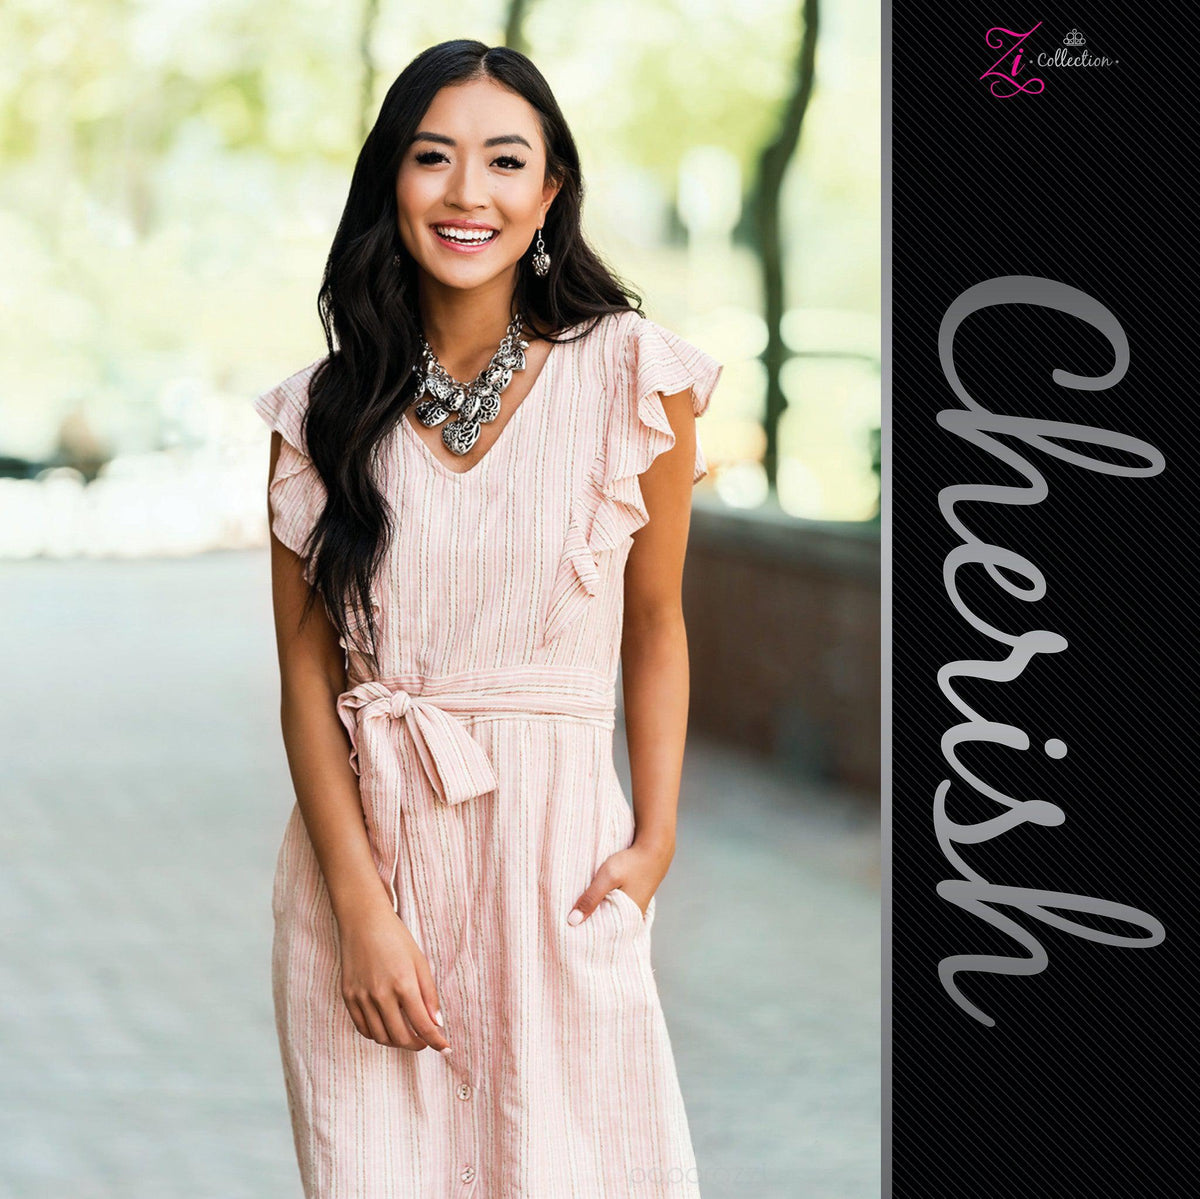 Cherish 2019 Zi Collection Necklace and matching Earrings - Paparazzi Accessories-CarasShop.com - $5 Jewelry by Cara Jewels